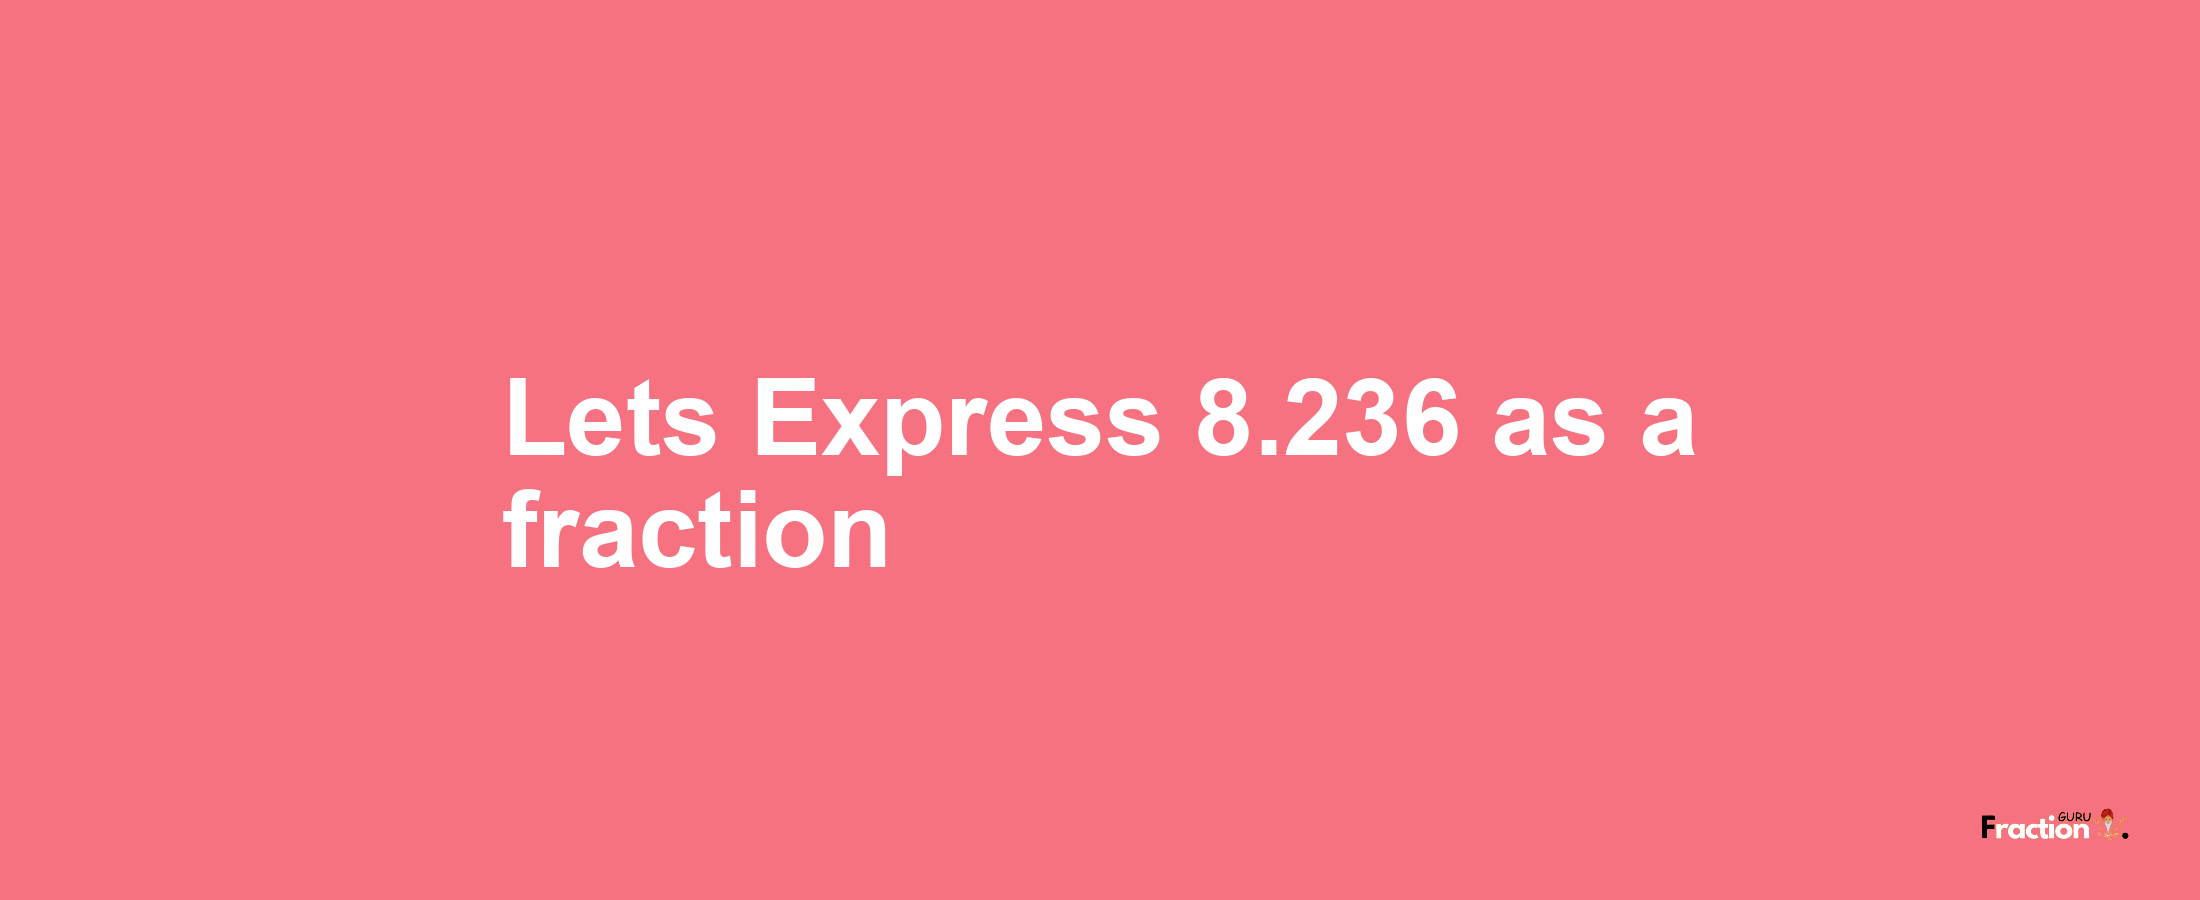 Lets Express 8.236 as afraction